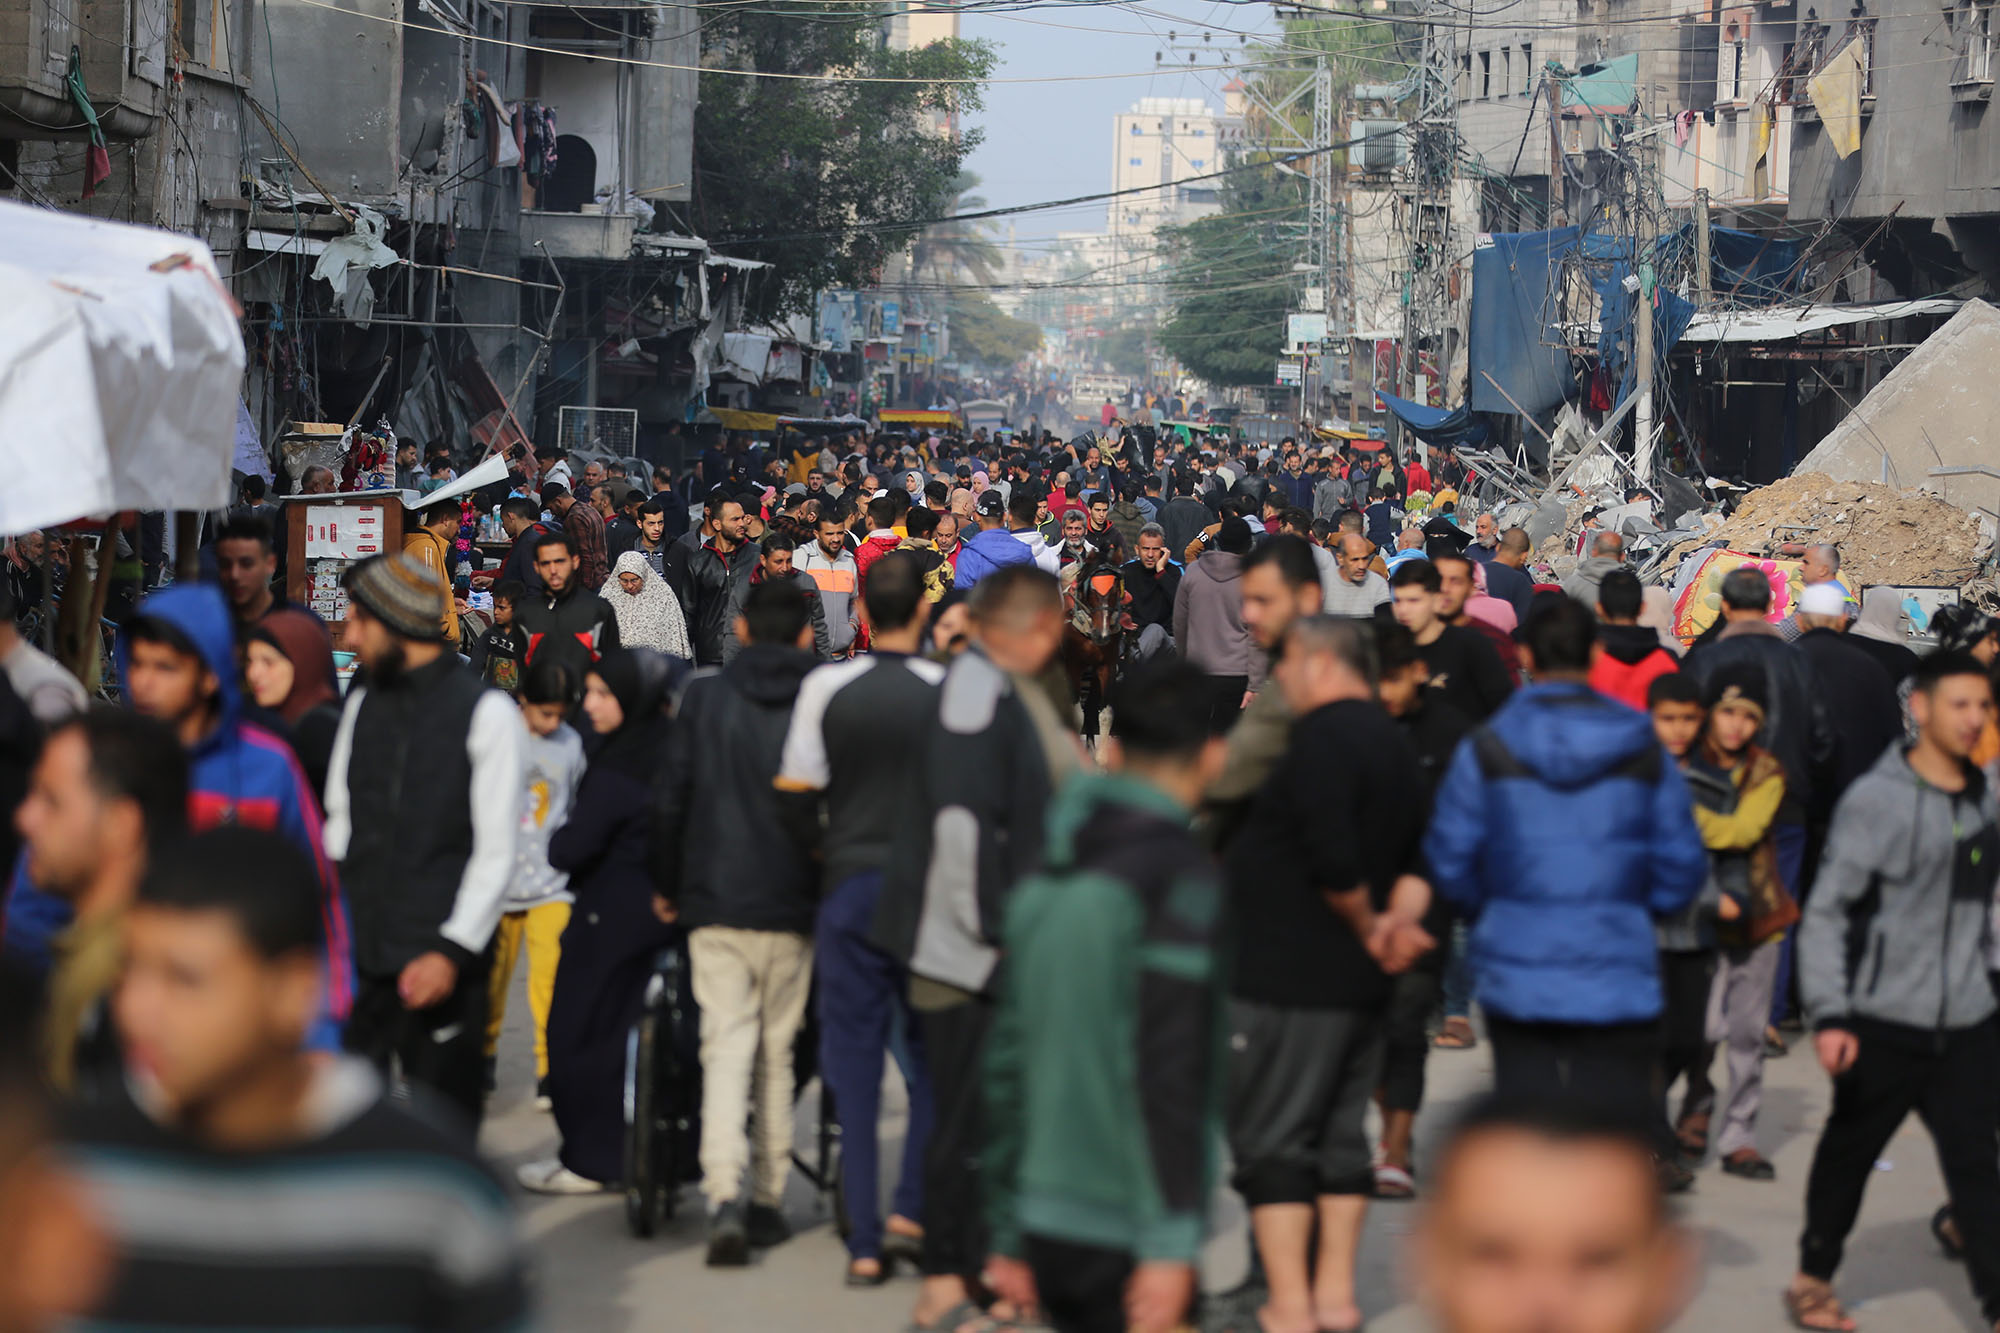 People are seen on a crowded street in Maghazi refugee camp, Gaza, on December 7.